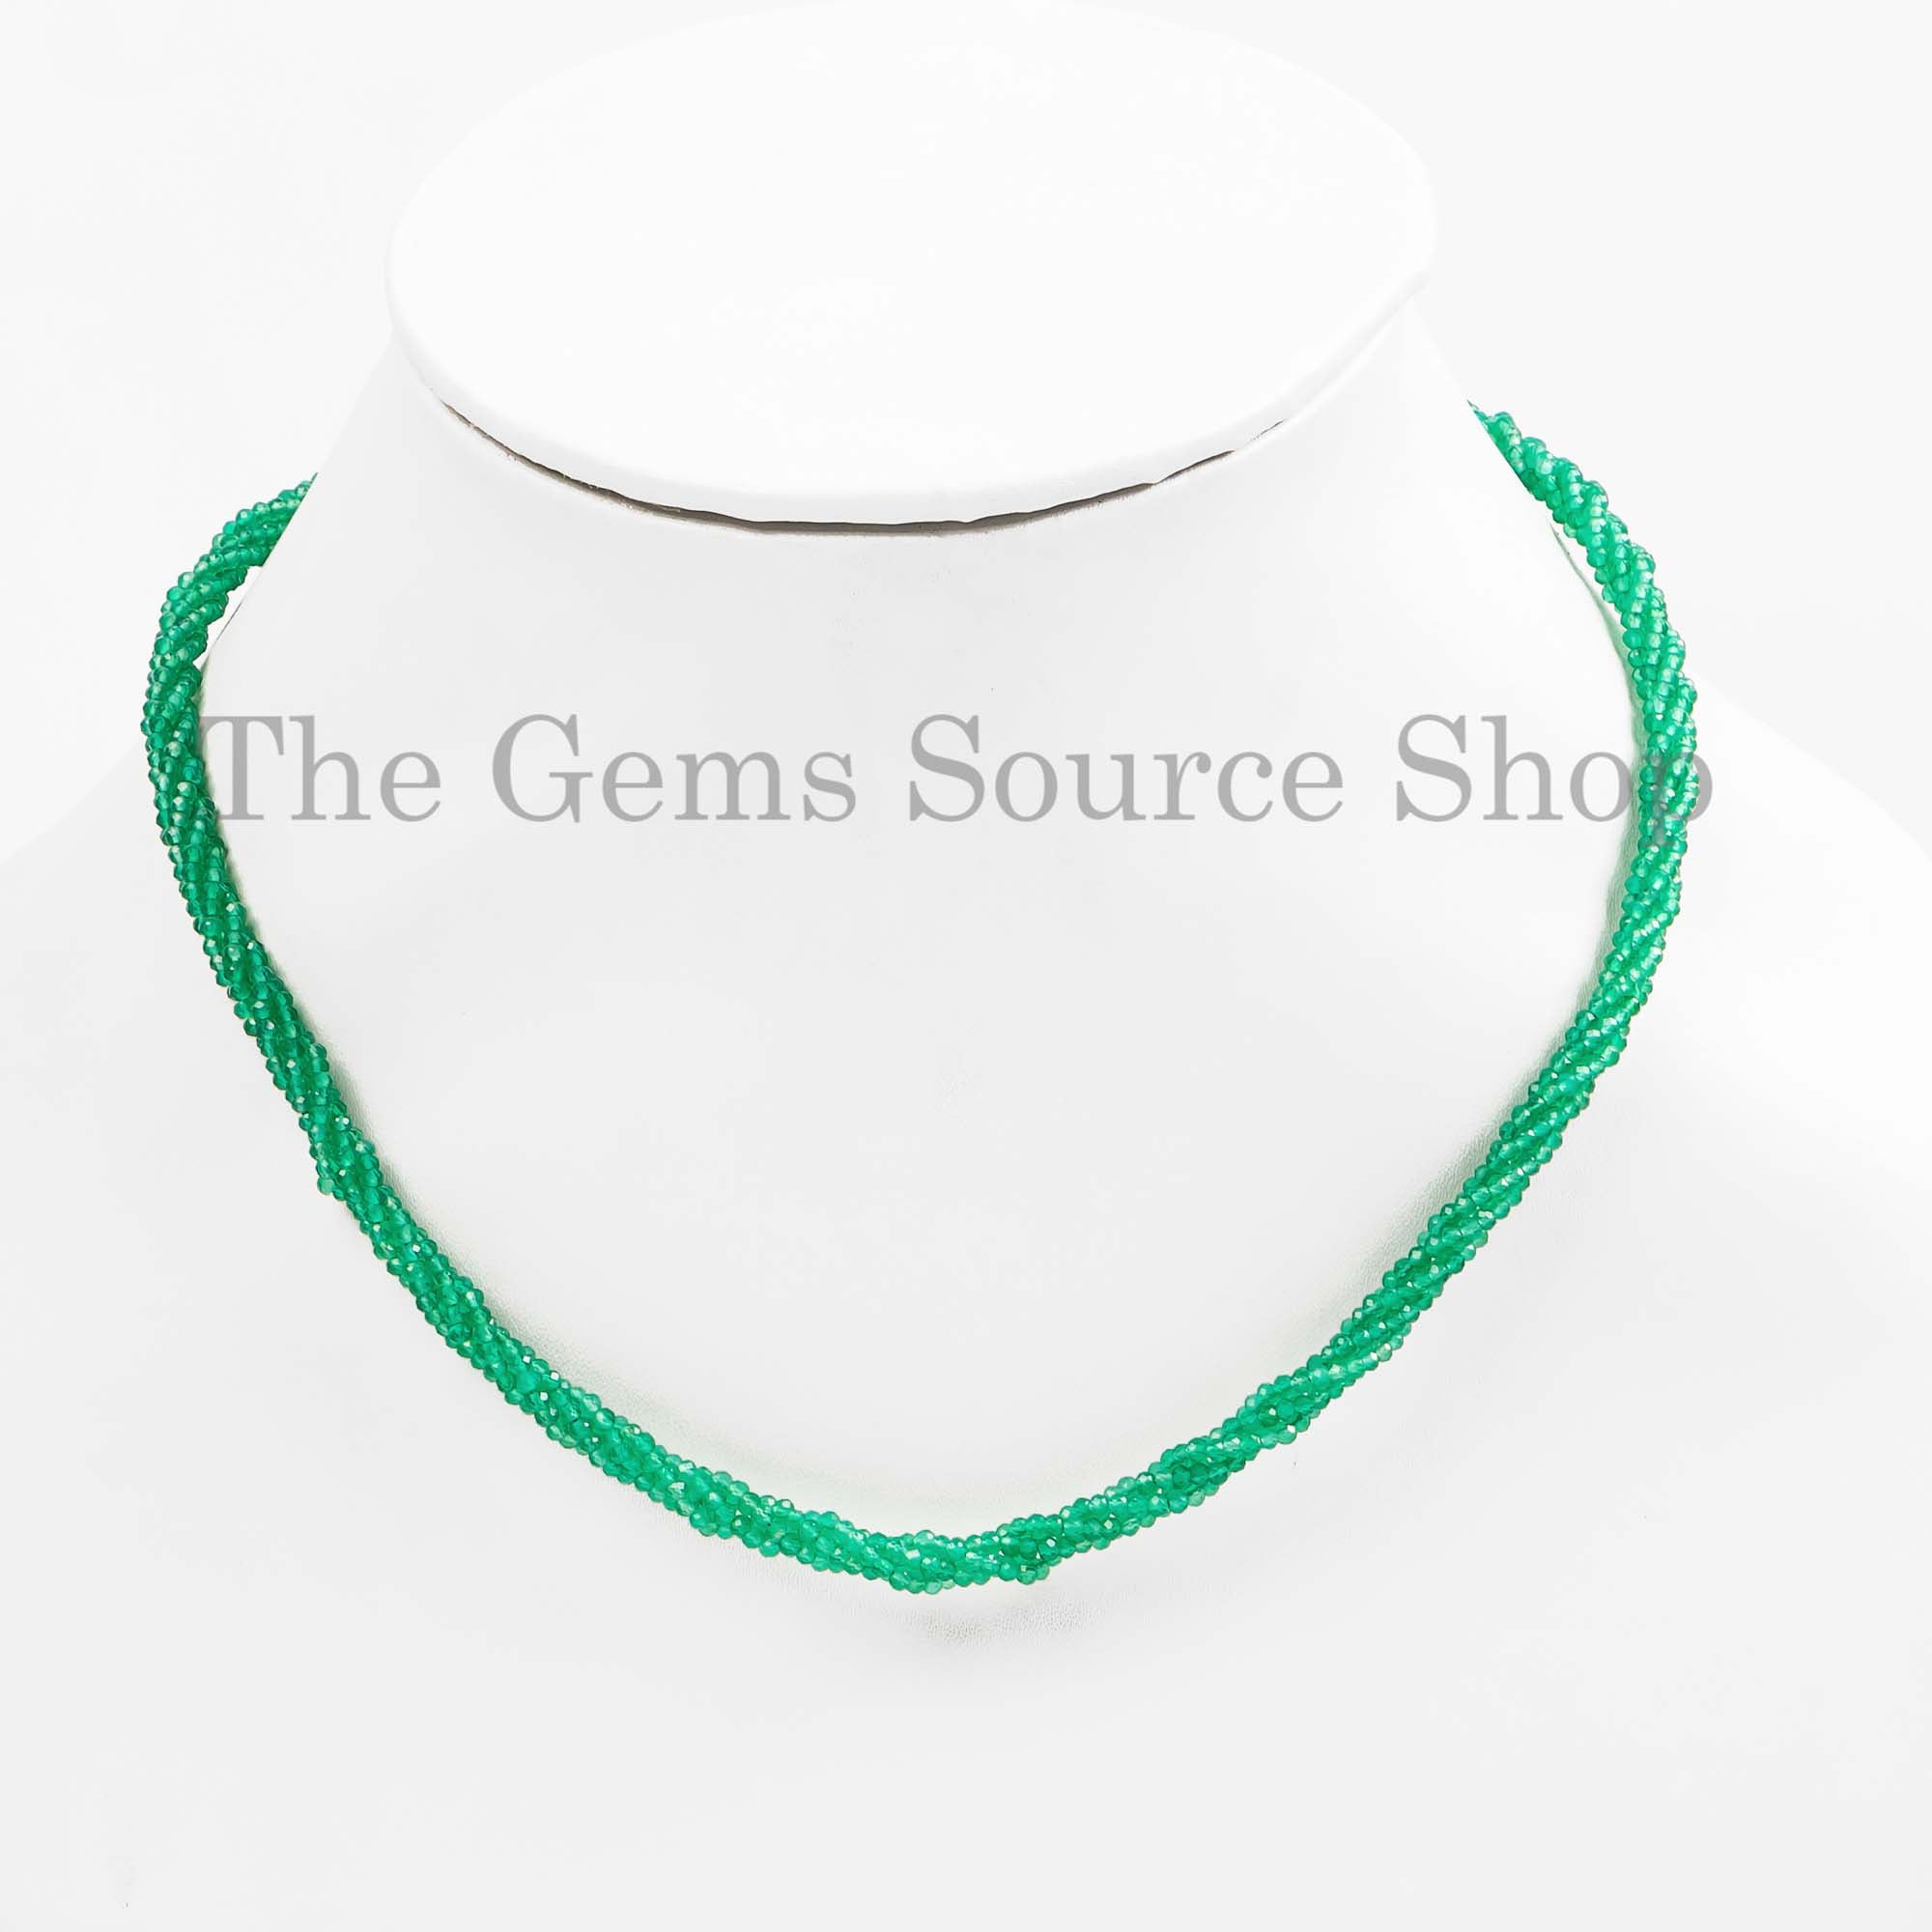 Green Onyx Beads Necklace, Green Onyx Faceted Beads Necklace, Green Onyx Rondelle Beads Necklace